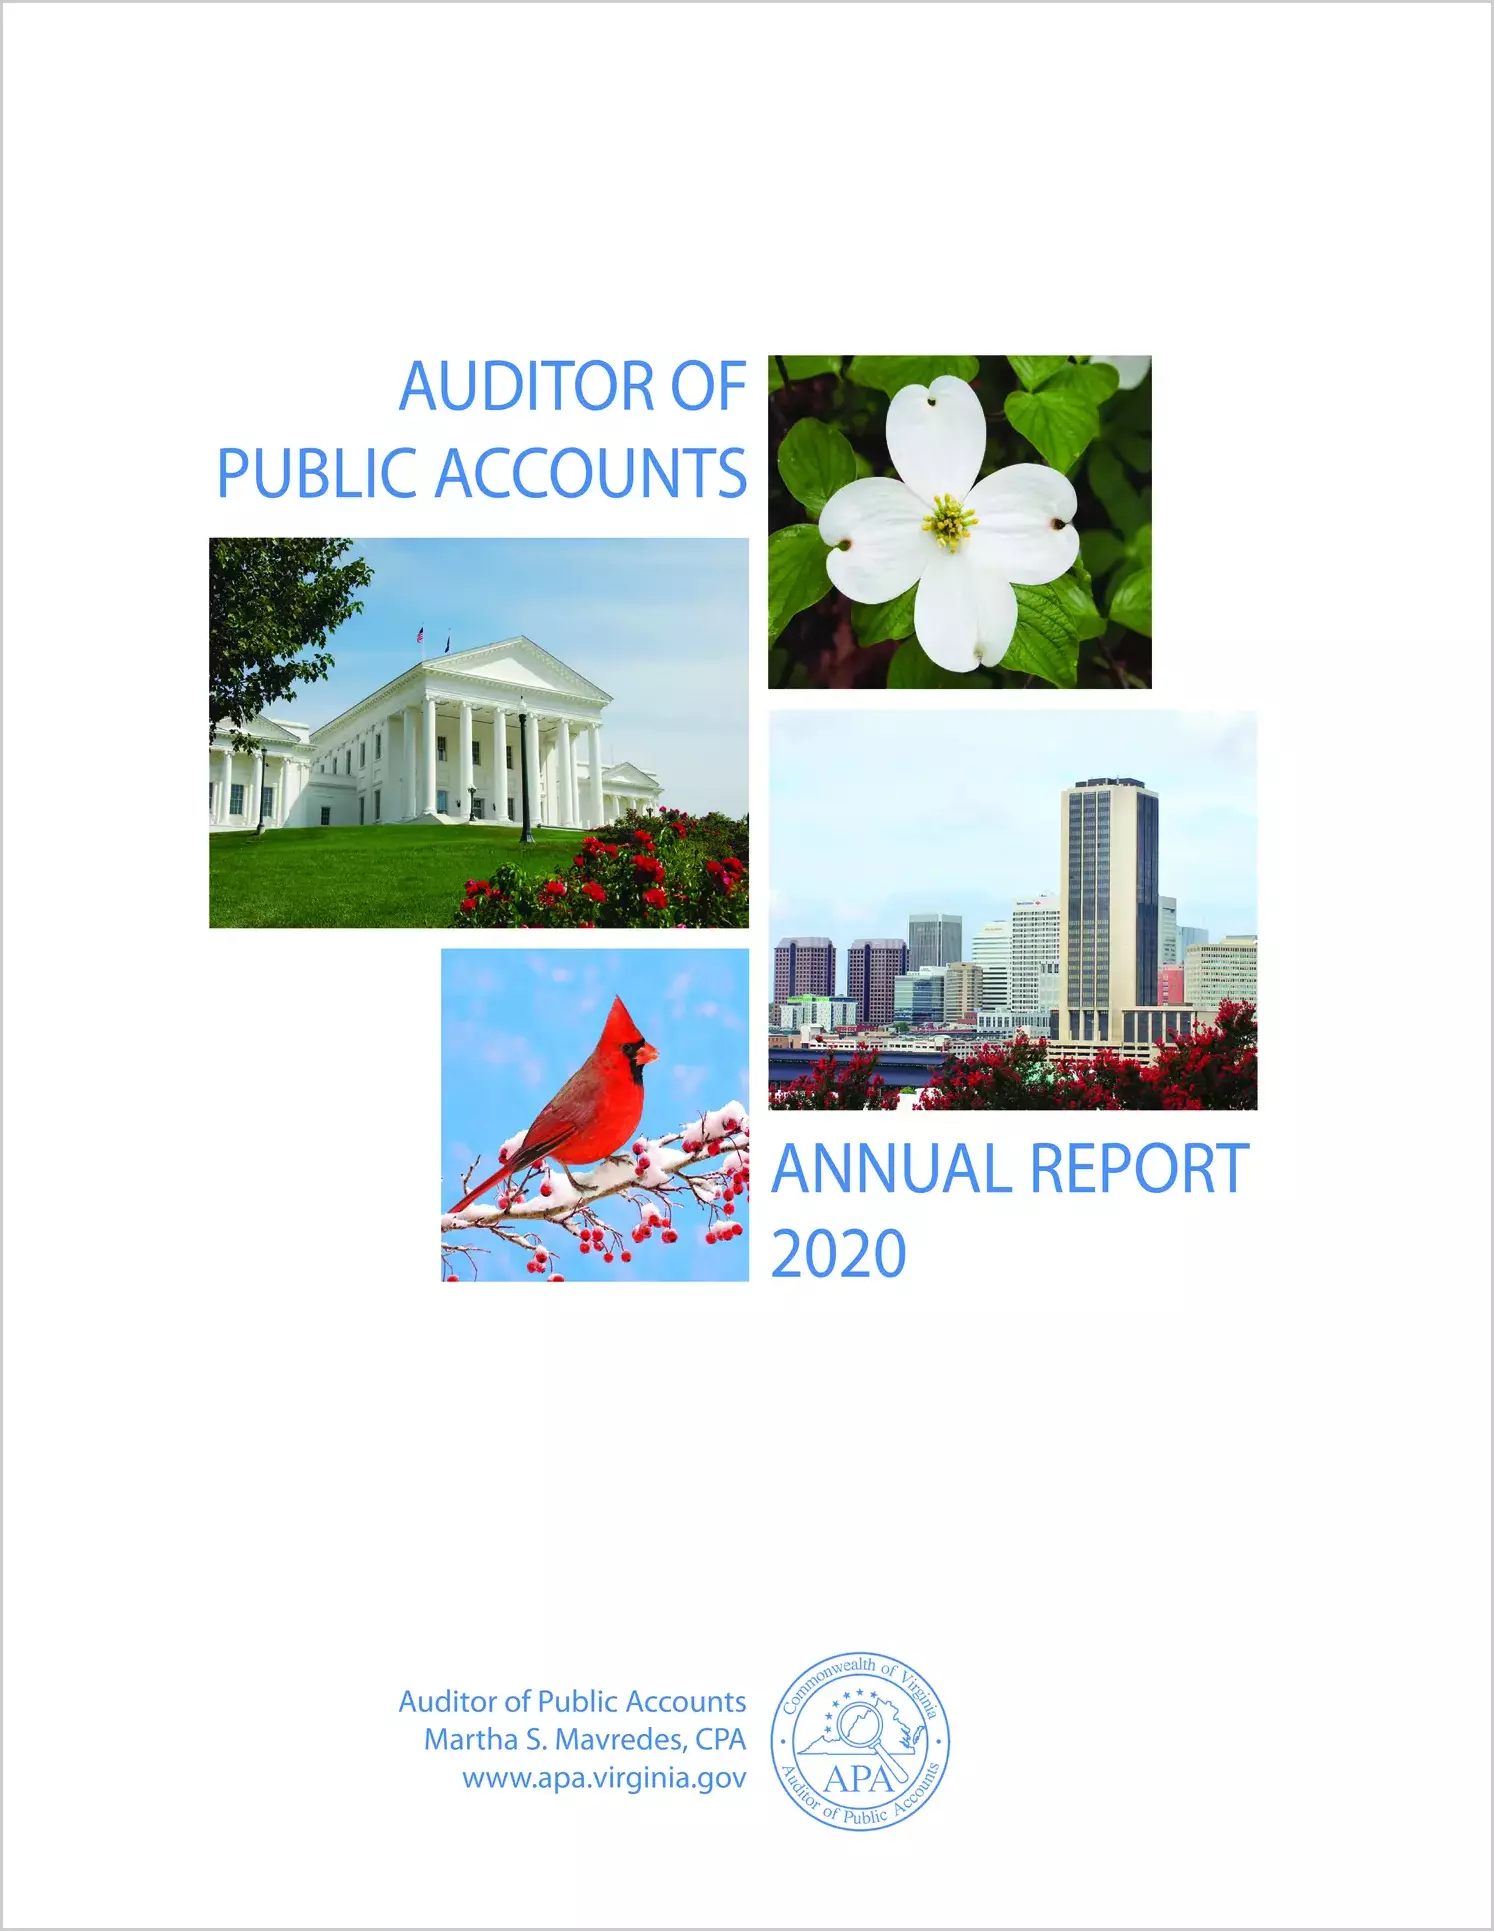 2020 Annual Report of the Auditor of Public Accounts